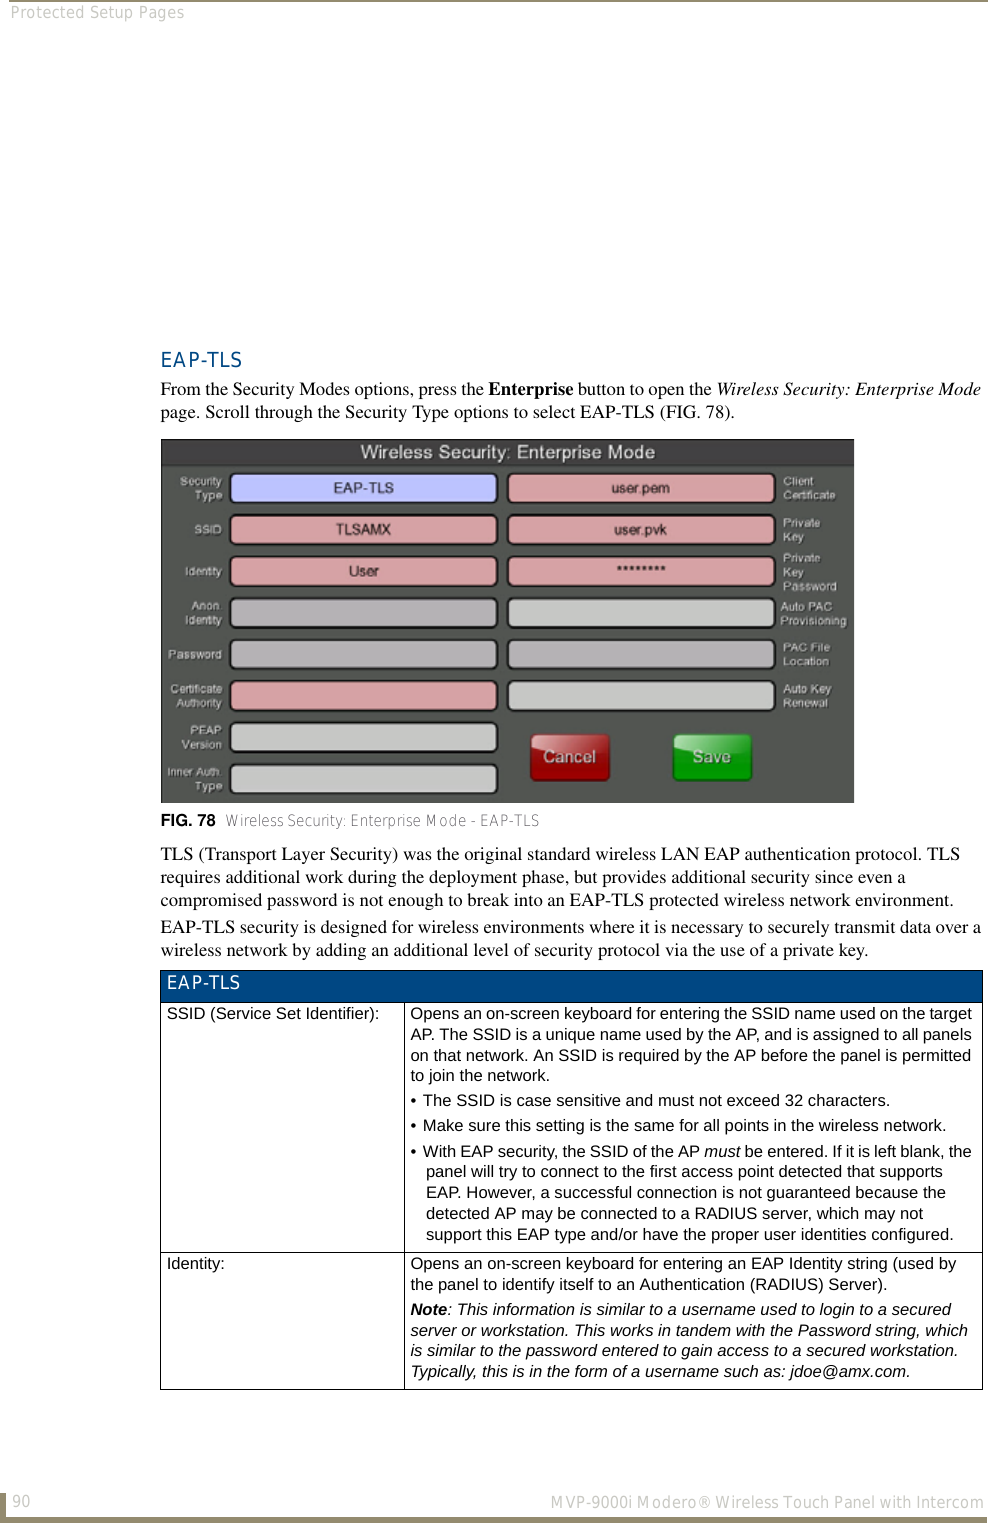 Protected Setup Pages90  MVP-9000i Modero® Wireless Touch Panel with IntercomEAP-TLSFrom the Security Modes options, press the Enterprise button to open the Wireless Security: Enterprise Mode page. Scroll through the Security Type options to select EAP-TLS (FIG. 78).     TLS (Transport Layer Security) was the original standard wireless LAN EAP authentication protocol. TLS requires additional work during the deployment phase, but provides additional security since even a compromised password is not enough to break into an EAP-TLS protected wireless network environment.EAP-TLS security is designed for wireless environments where it is necessary to securely transmit data over a wireless network by adding an additional level of security protocol via the use of a private key.  FIG. 78  Wireless Security: Enterprise Mode - EAP-TLSEAP-TLSSSID (Service Set Identifier): Opens an on-screen keyboard for entering the SSID name used on the target AP. The SSID is a unique name used by the AP, and is assigned to all panels on that network. An SSID is required by the AP before the panel is permitted to join the network. • The SSID is case sensitive and must not exceed 32 characters. • Make sure this setting is the same for all points in the wireless network.• With EAP security, the SSID of the AP must be entered. If it is left blank, the panel will try to connect to the first access point detected that supports EAP. However, a successful connection is not guaranteed because the detected AP may be connected to a RADIUS server, which may not support this EAP type and/or have the proper user identities configured.Identity: Opens an on-screen keyboard for entering an EAP Identity string (used by the panel to identify itself to an Authentication (RADIUS) Server). Note: This information is similar to a username used to login to a secured server or workstation. This works in tandem with the Password string, which is similar to the password entered to gain access to a secured workstation. Typically, this is in the form of a username such as: jdoe@amx.com.